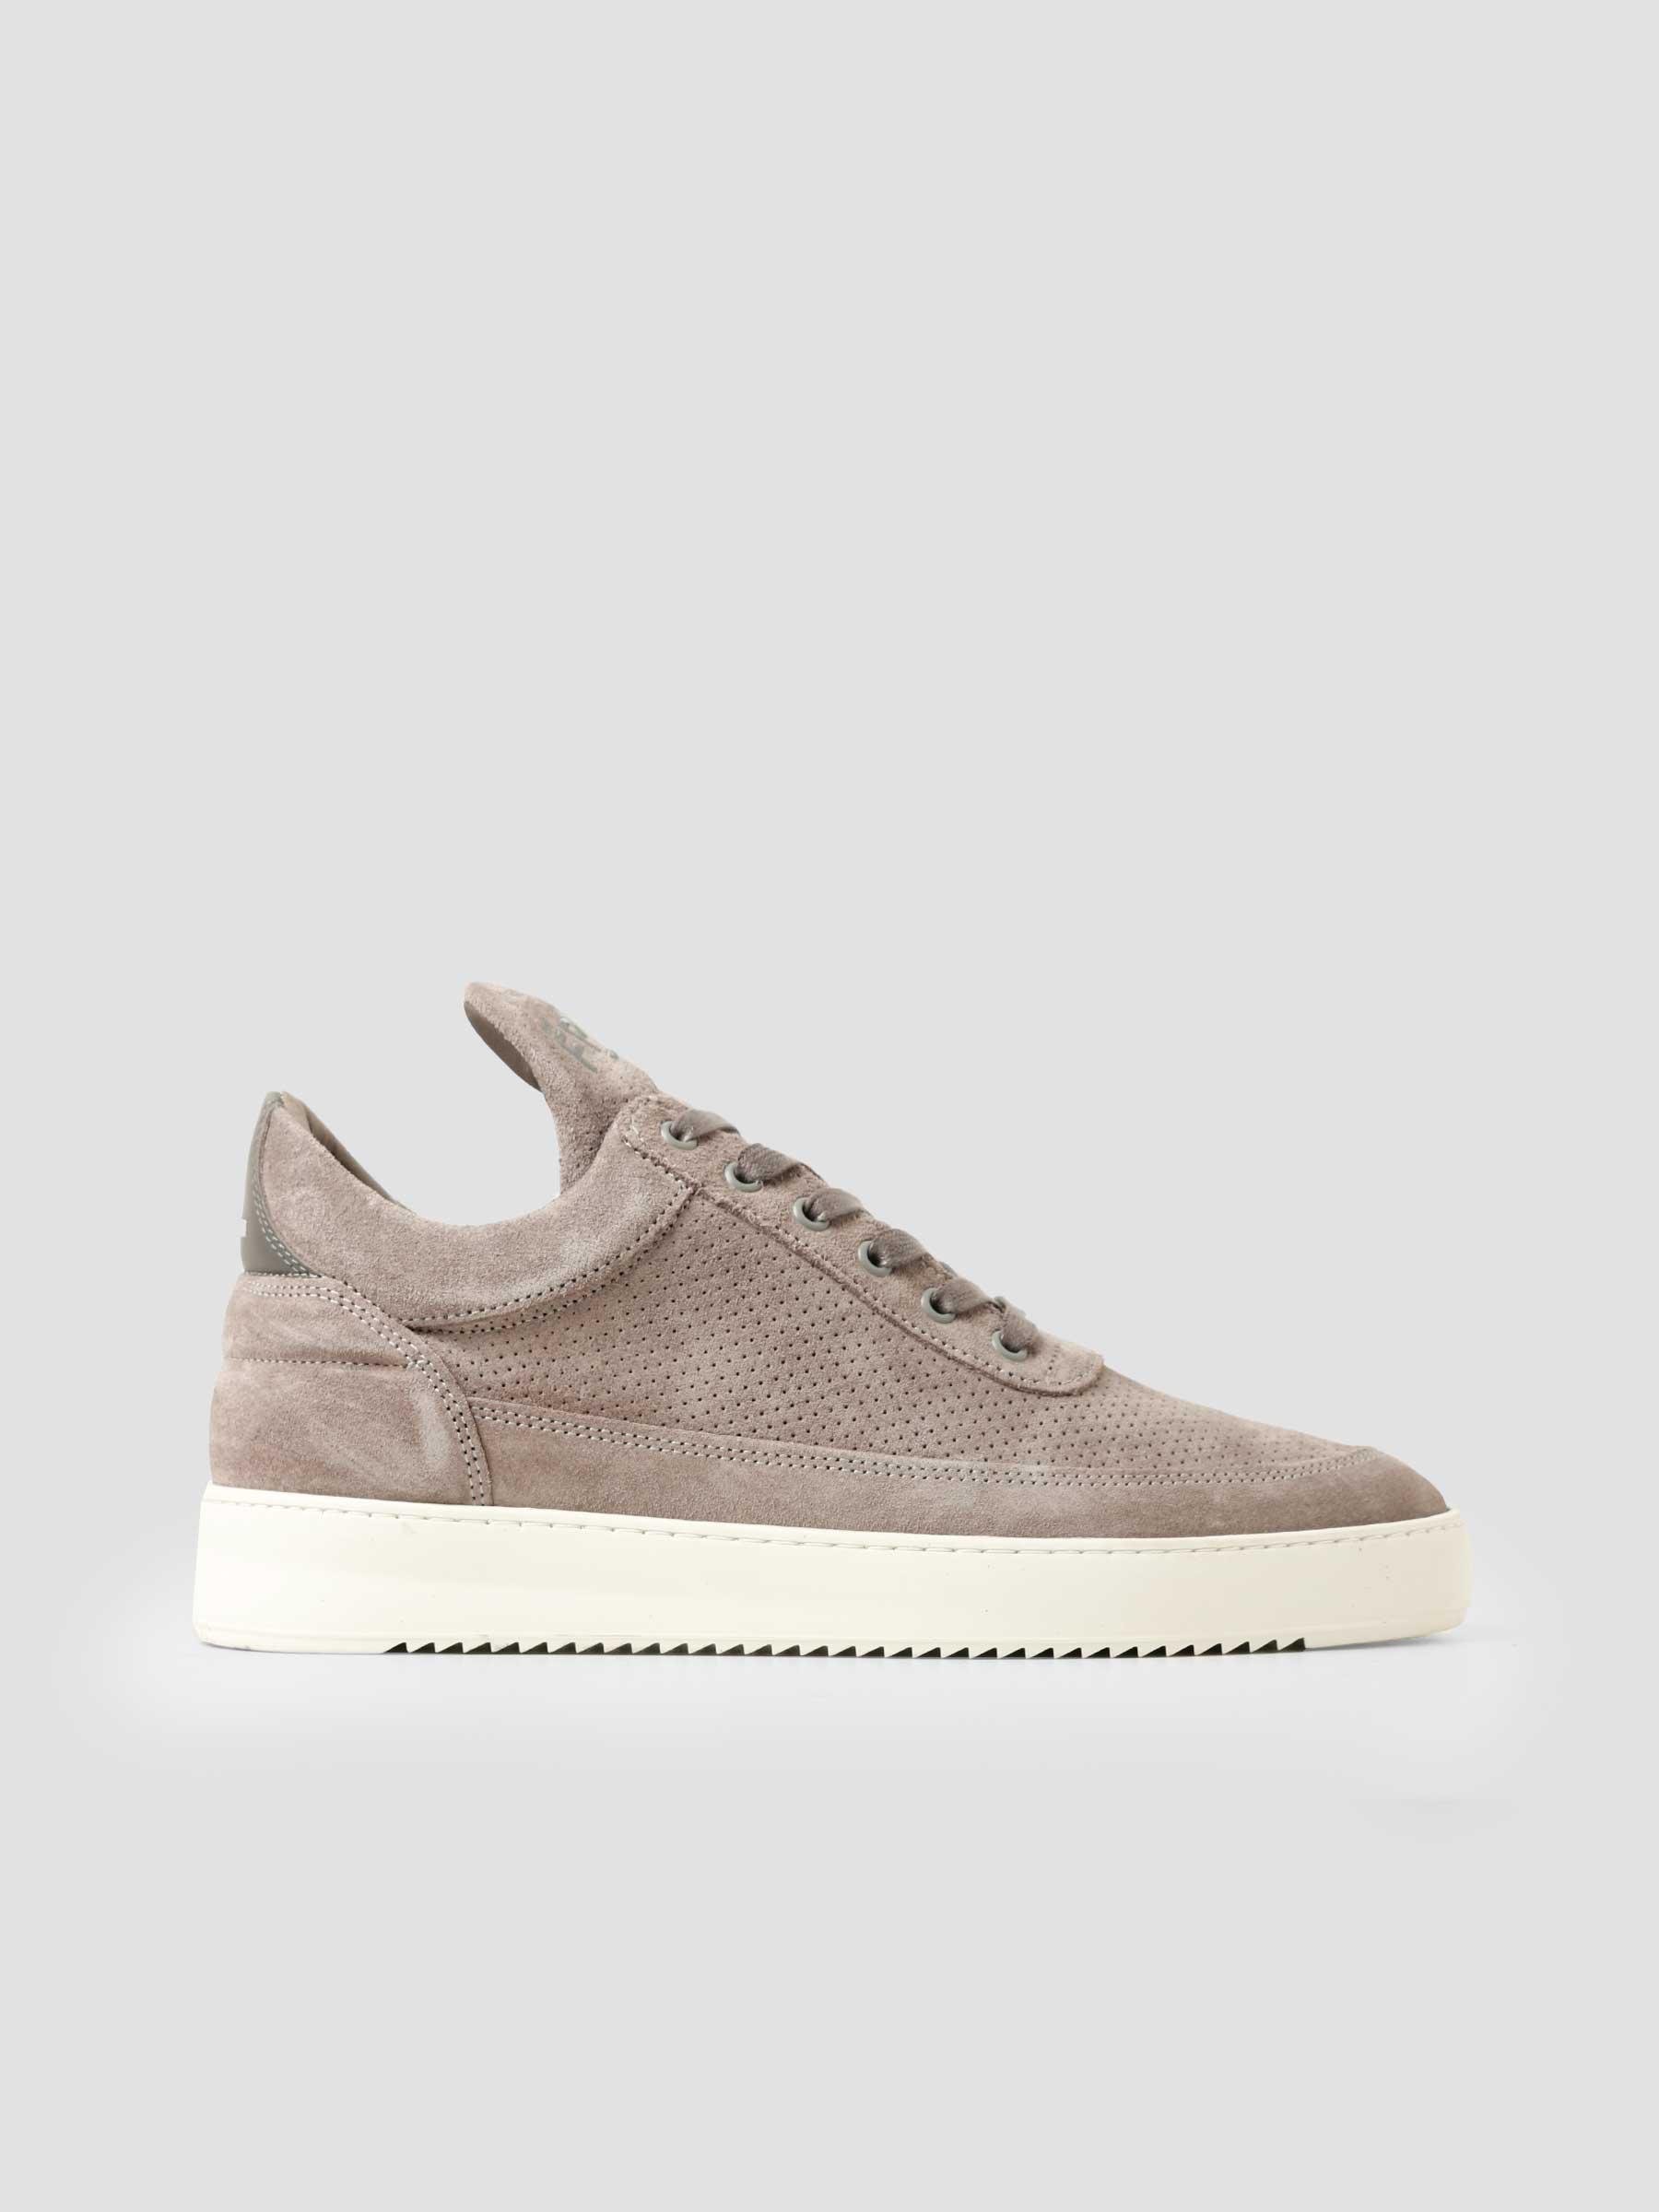 Low Top Perforated Grey 101201010020